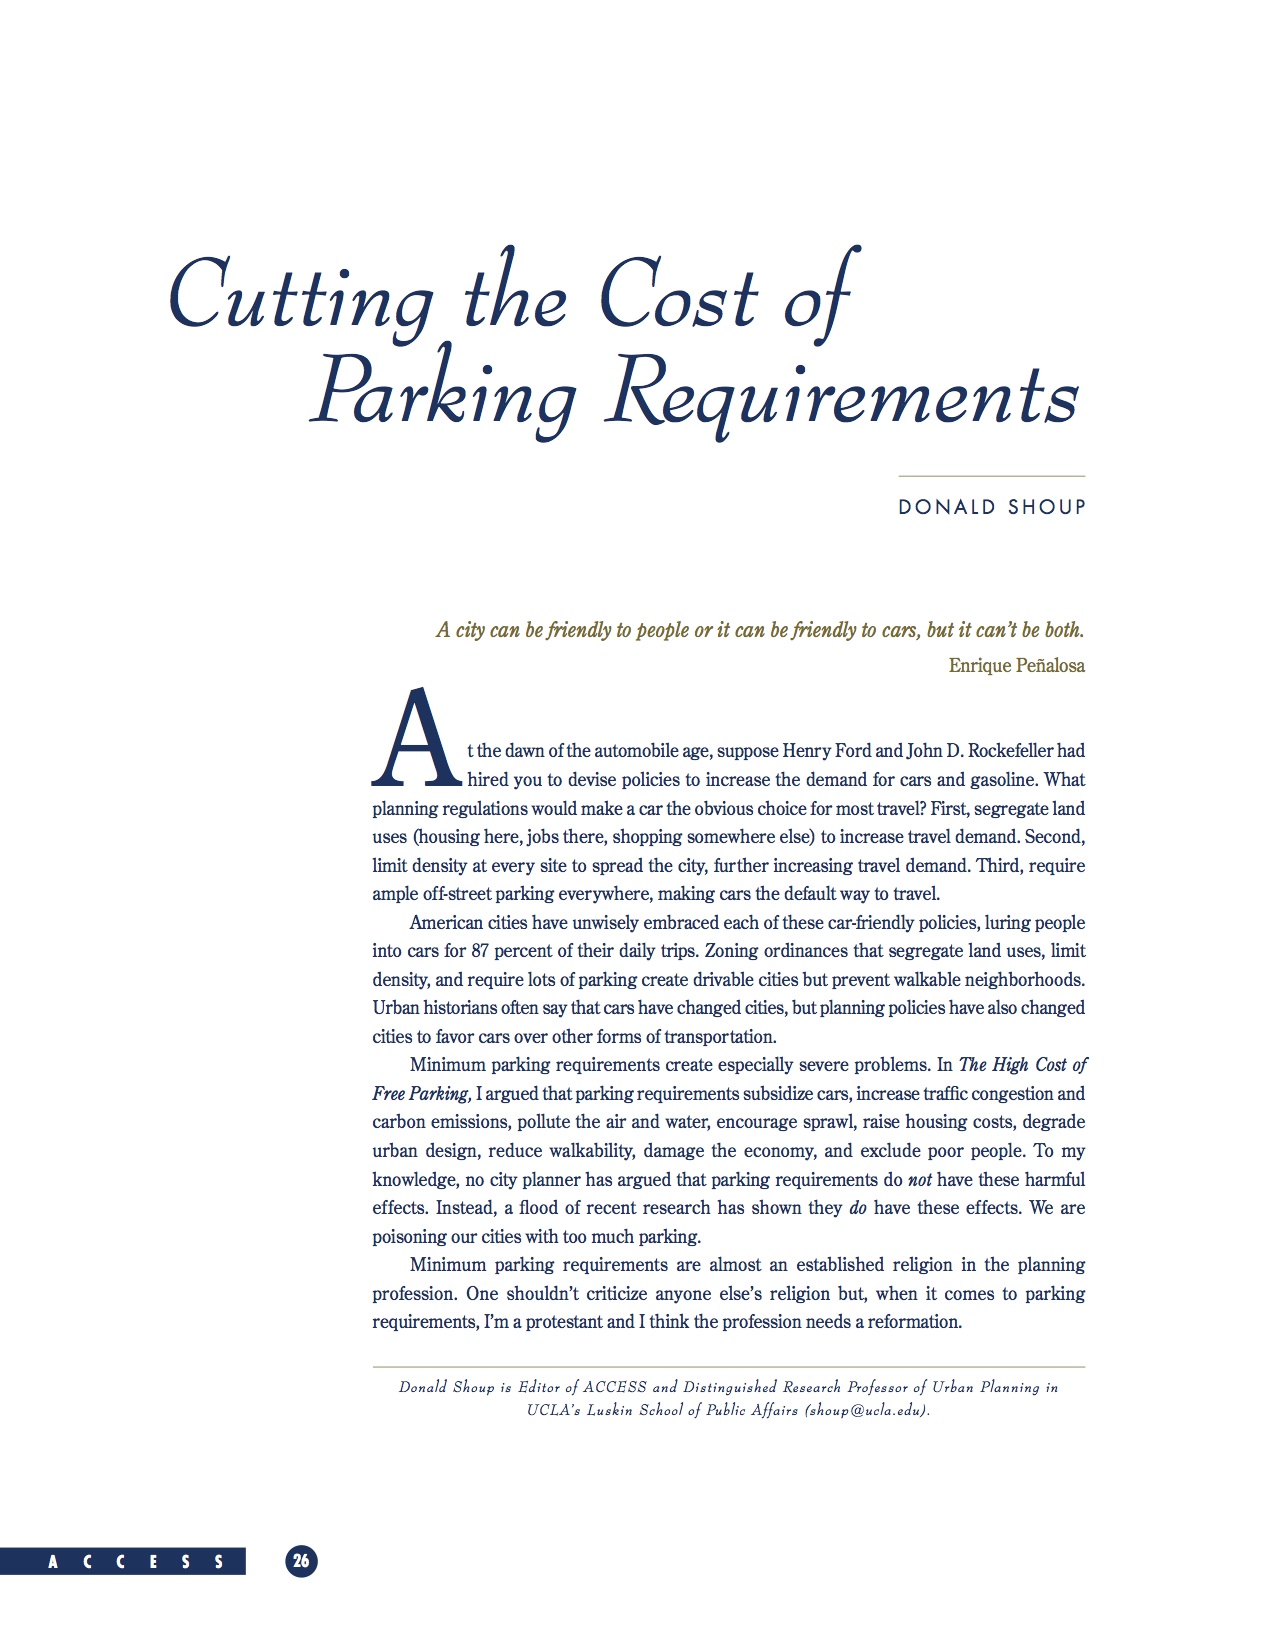 Cutting the Cost of Parking Requirements